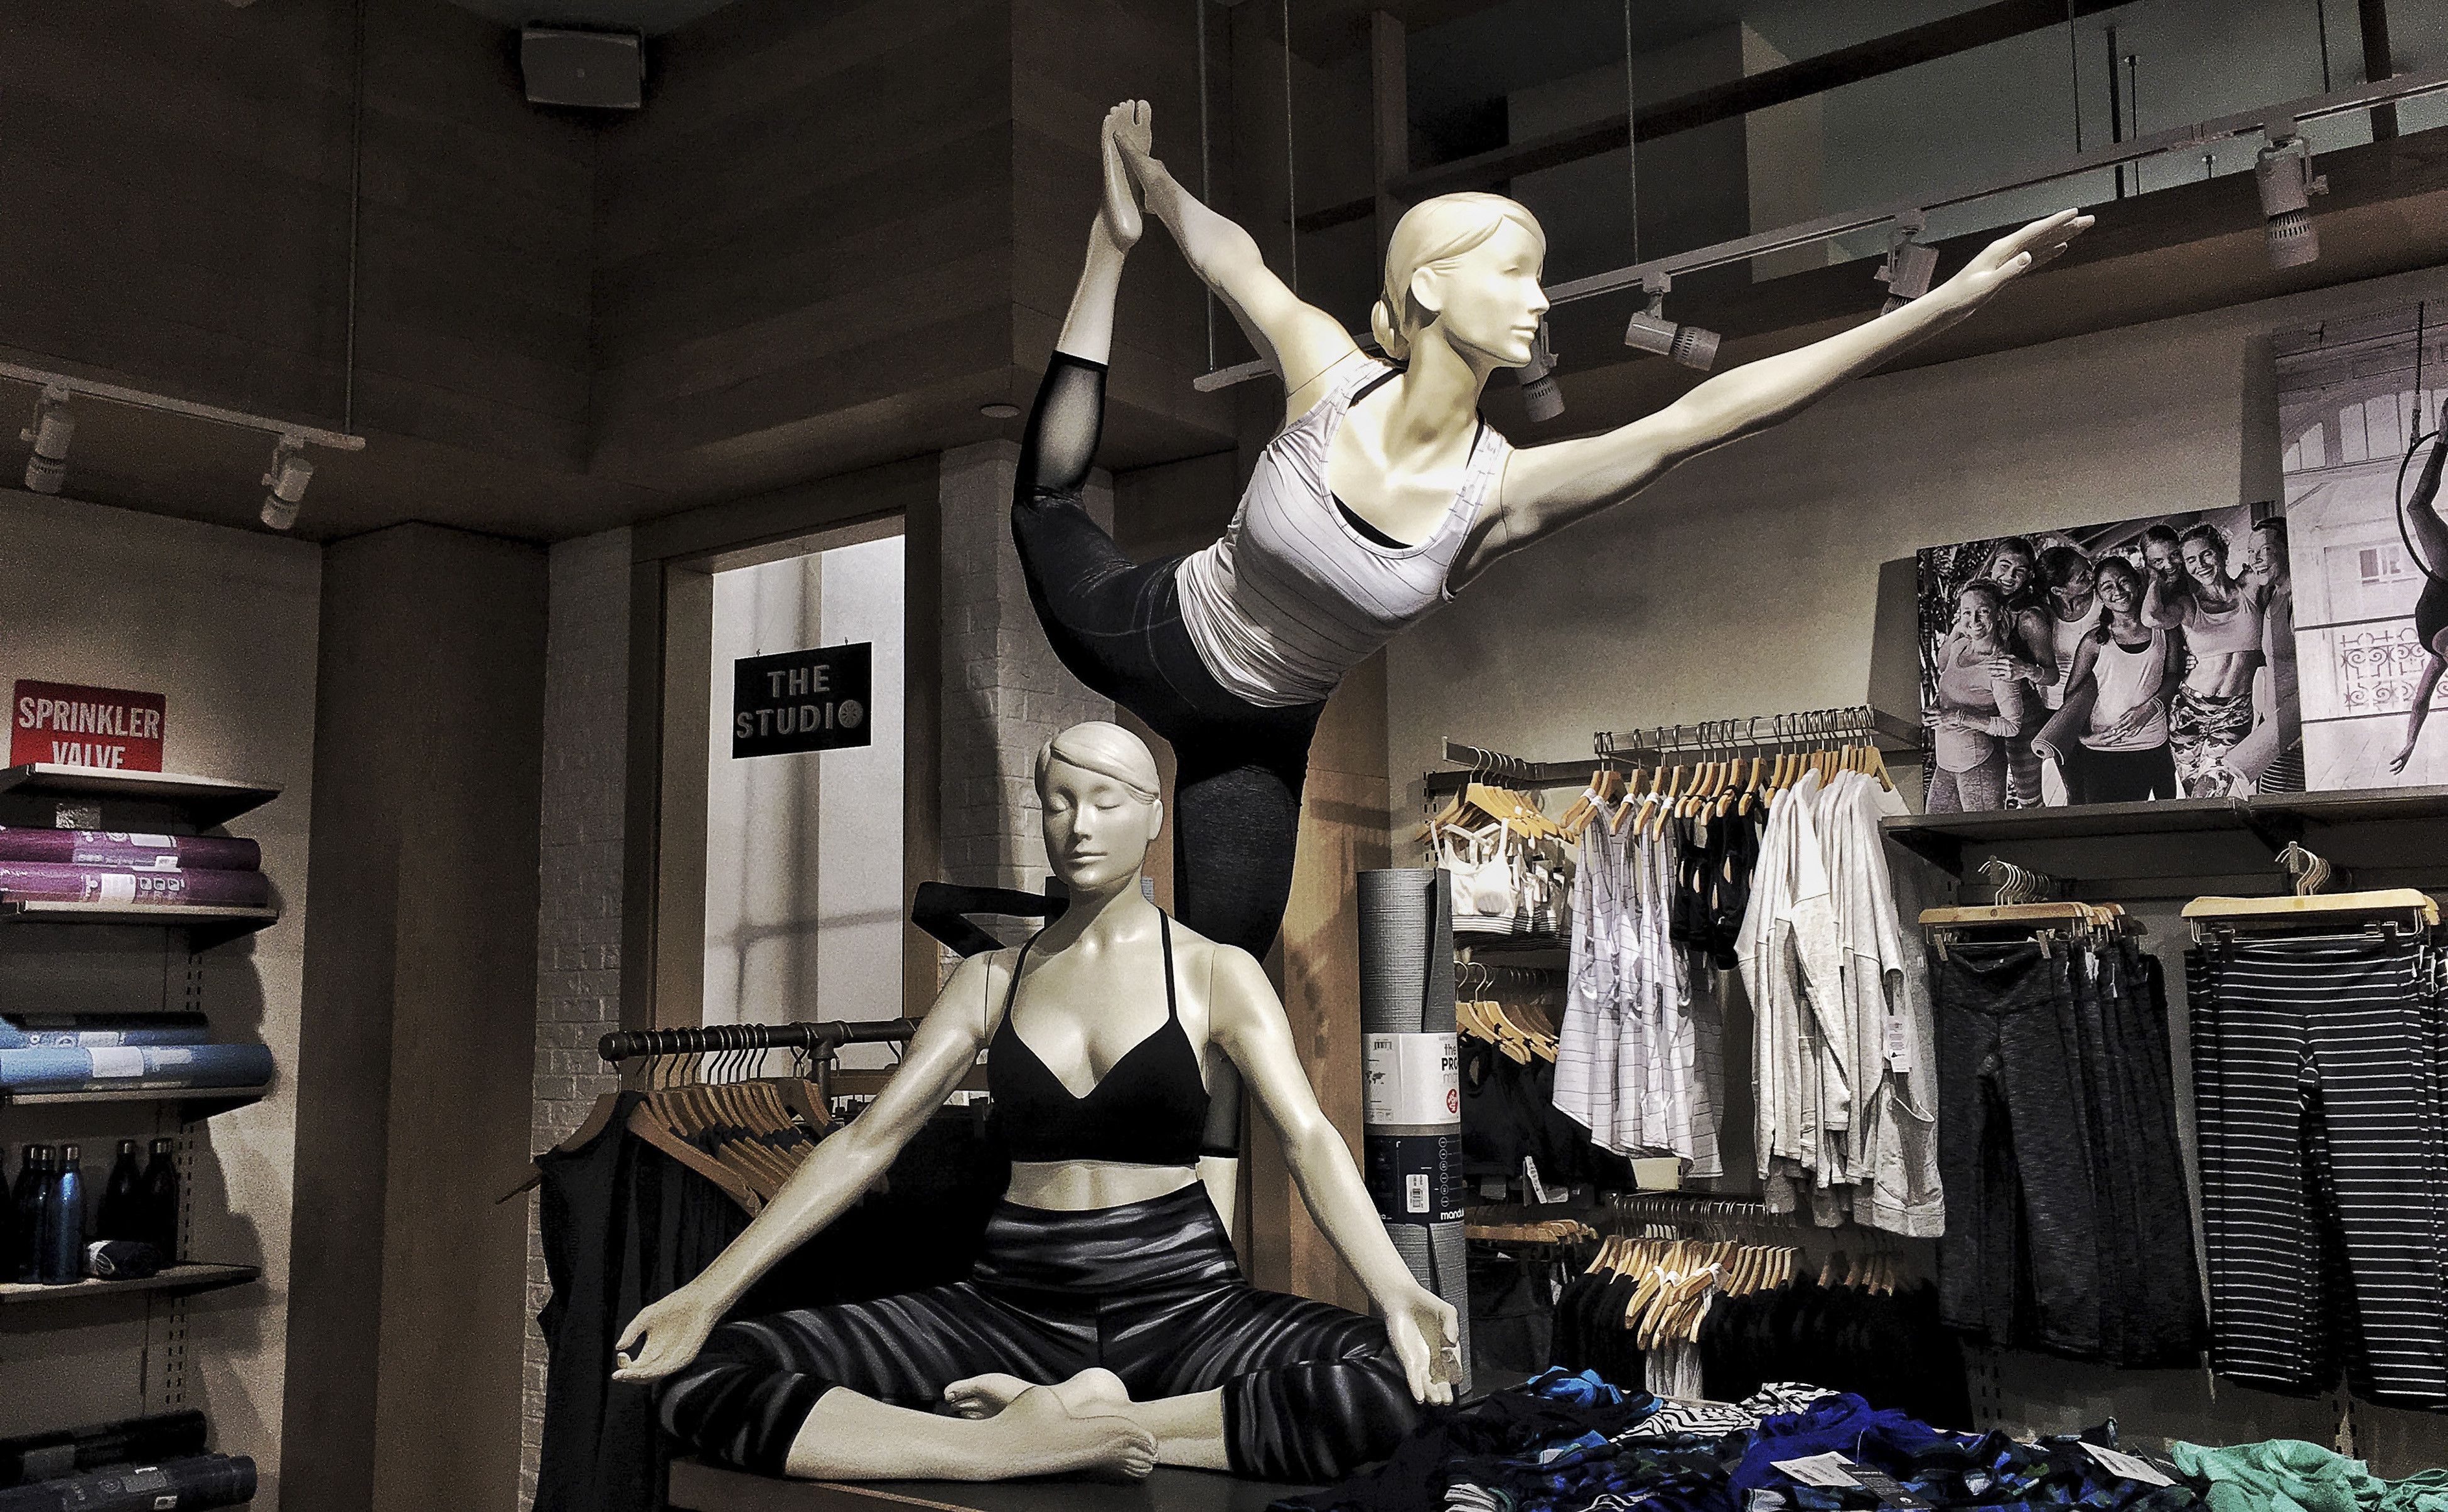 Gap's Athleta Moves Into 'Experiential Fitness' Space